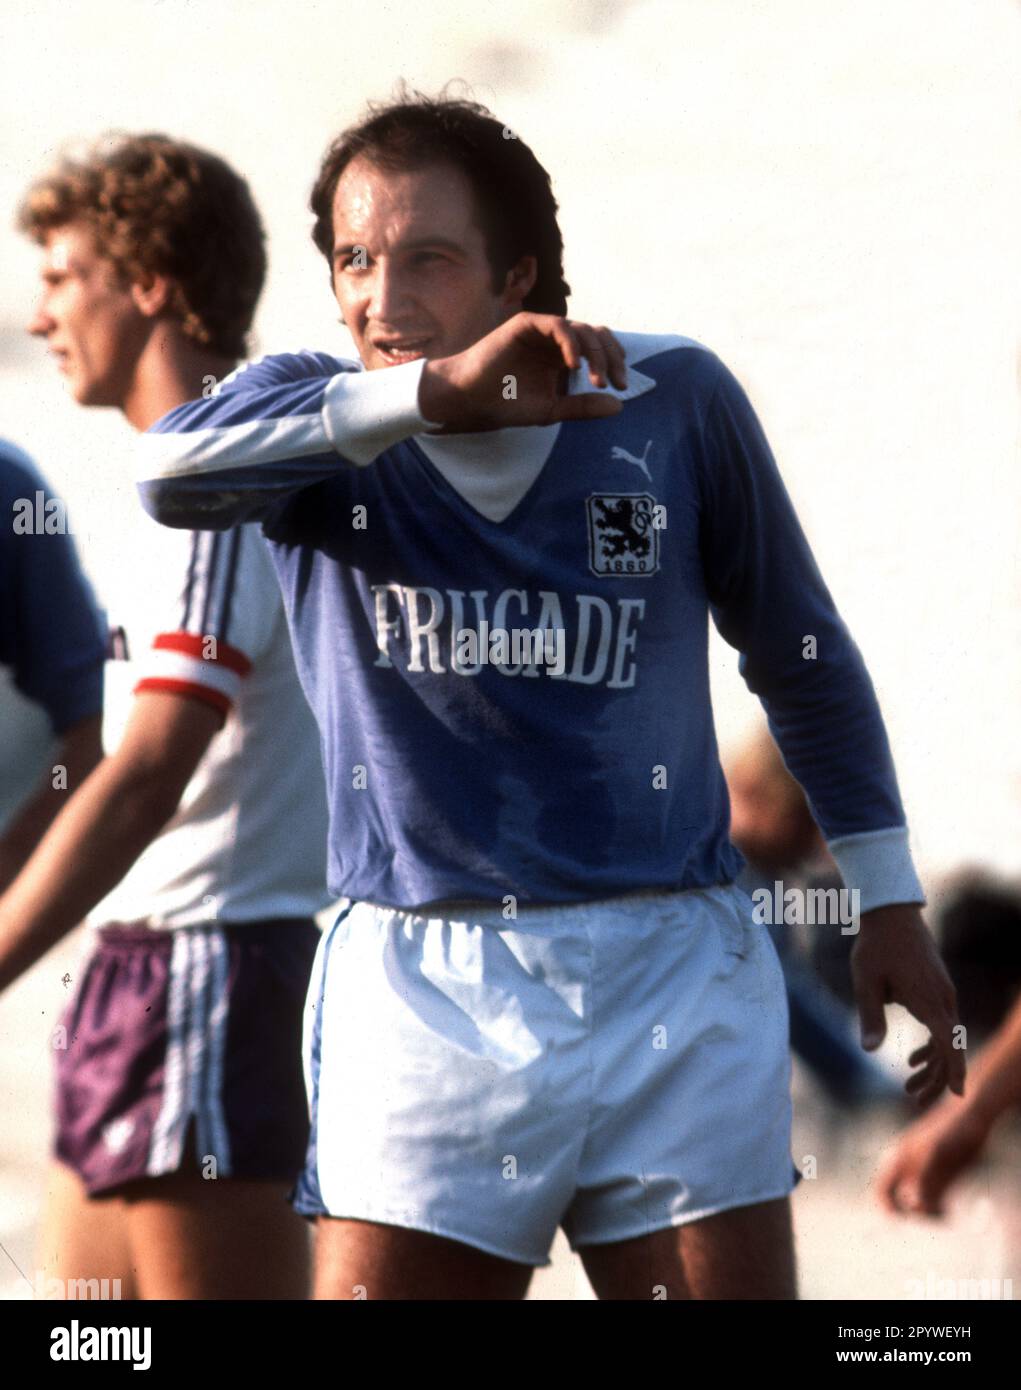 1860 Munich season 1978/79. Franz Gerber portrait. Rec. 15.09.1978 (estimated). For journalistic use only! Only for editorial use! [automated translation] Stock Photo